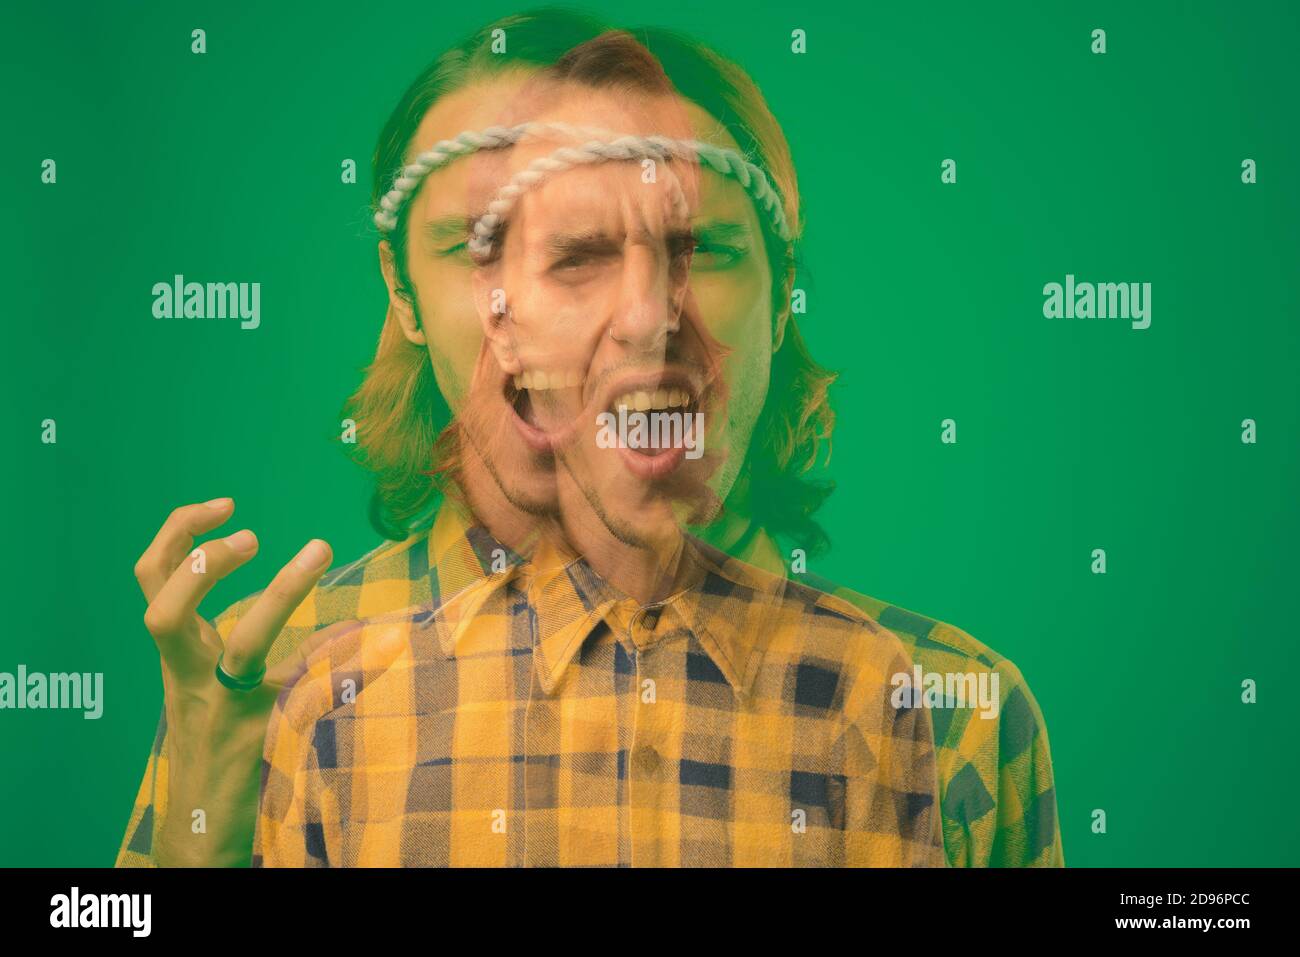 Studio shot of rebellious young man against green background Stock Photo